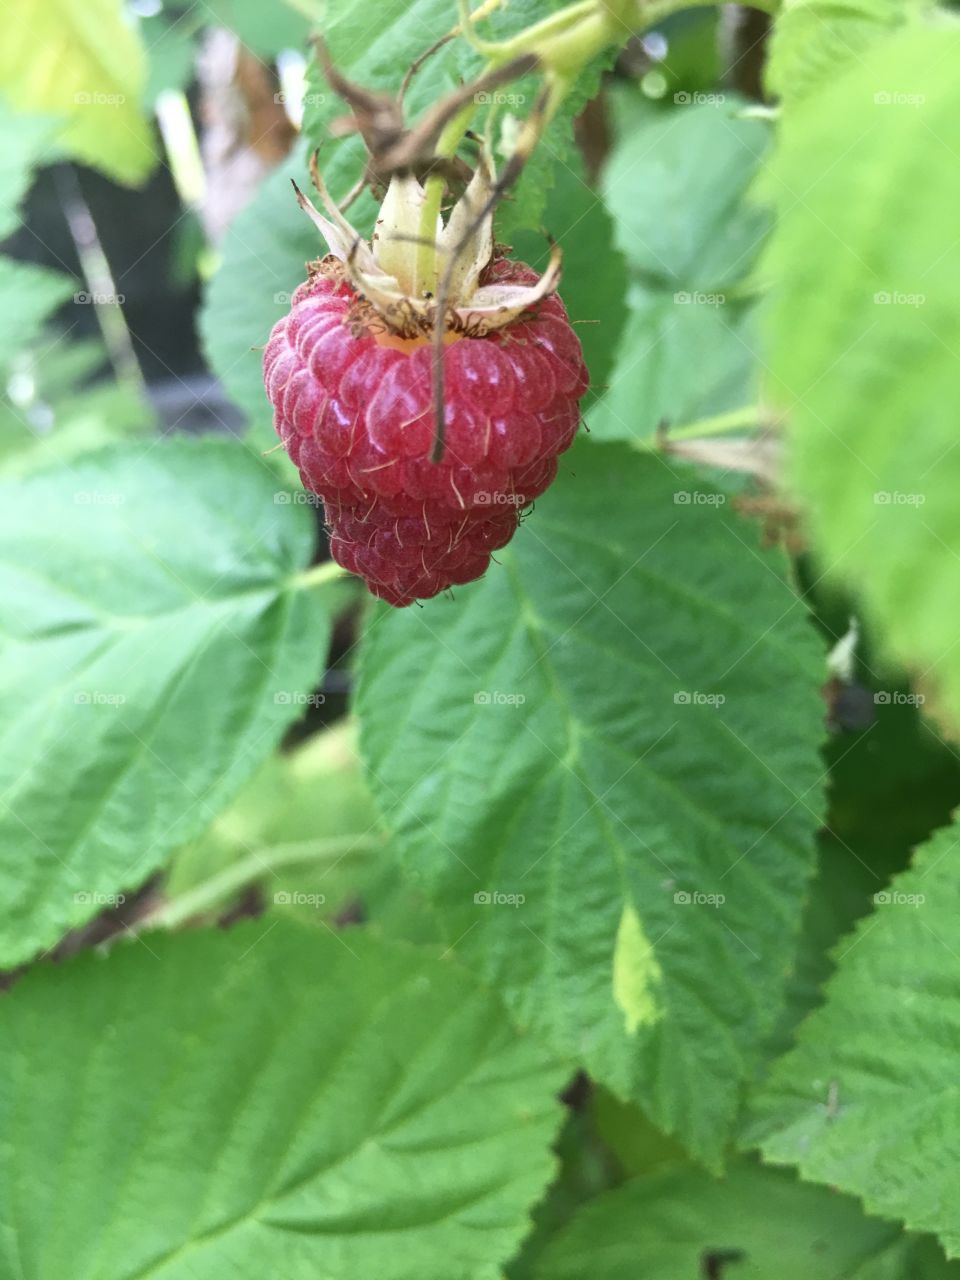 Delicious red raspberry ripe for the picking!